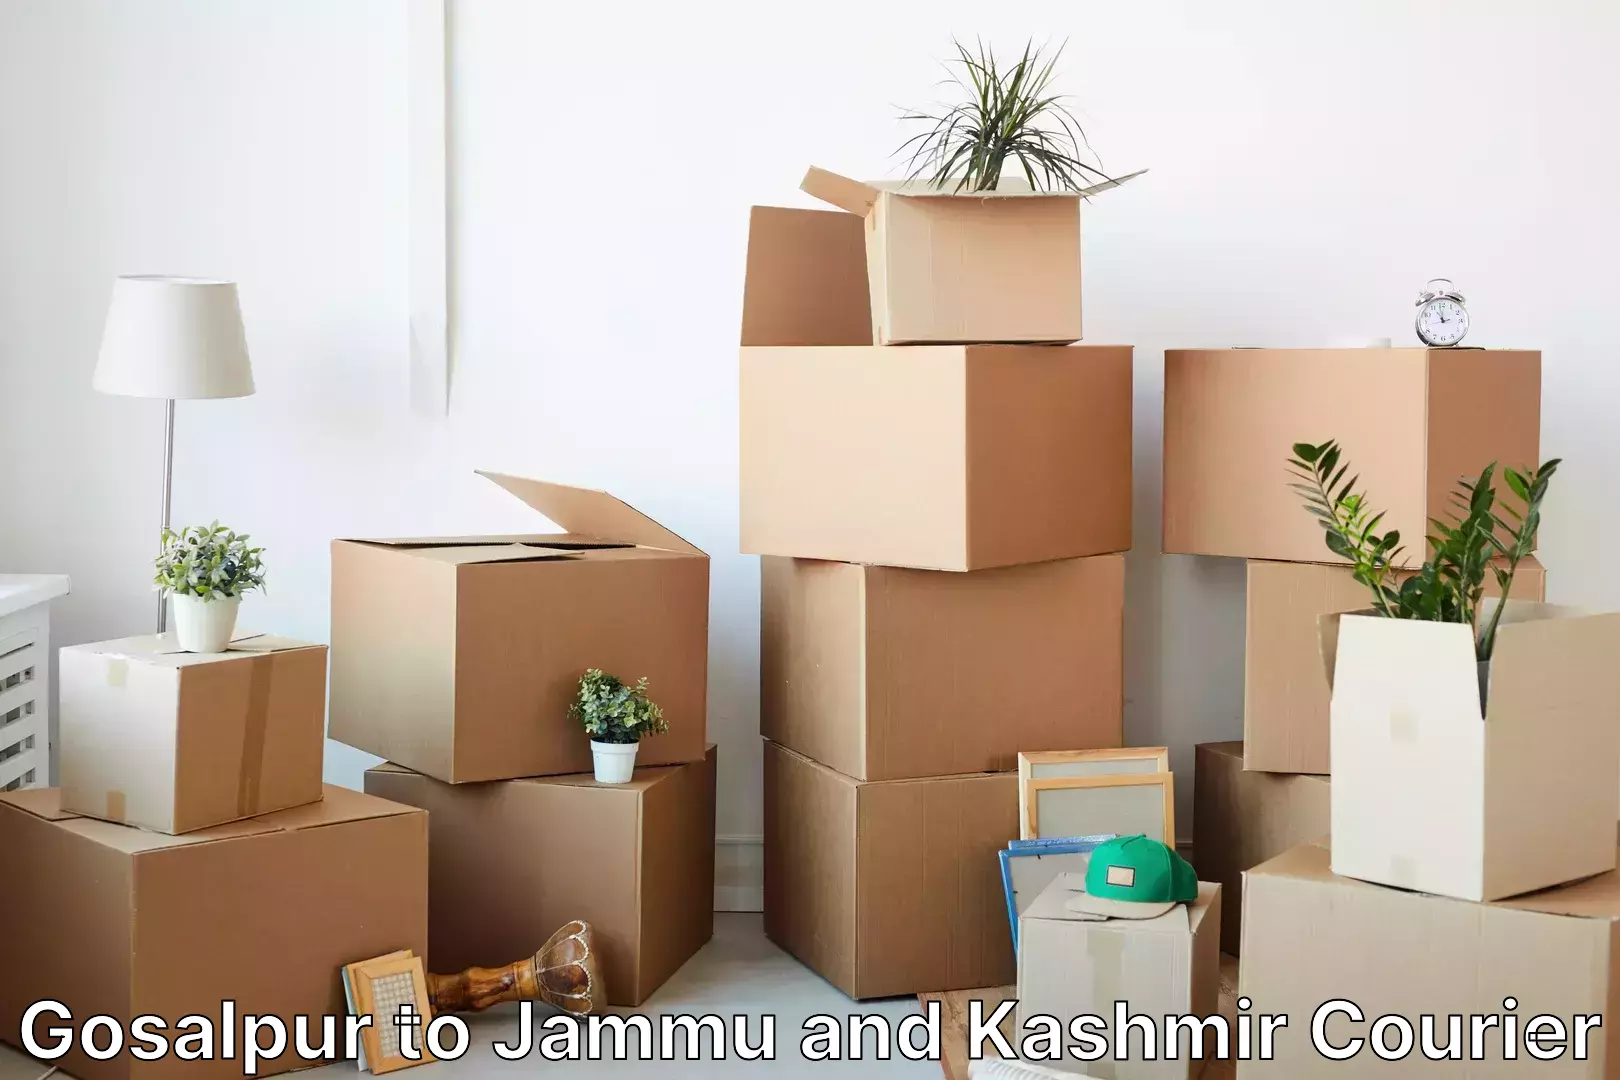 User-friendly delivery service Gosalpur to Jammu and Kashmir